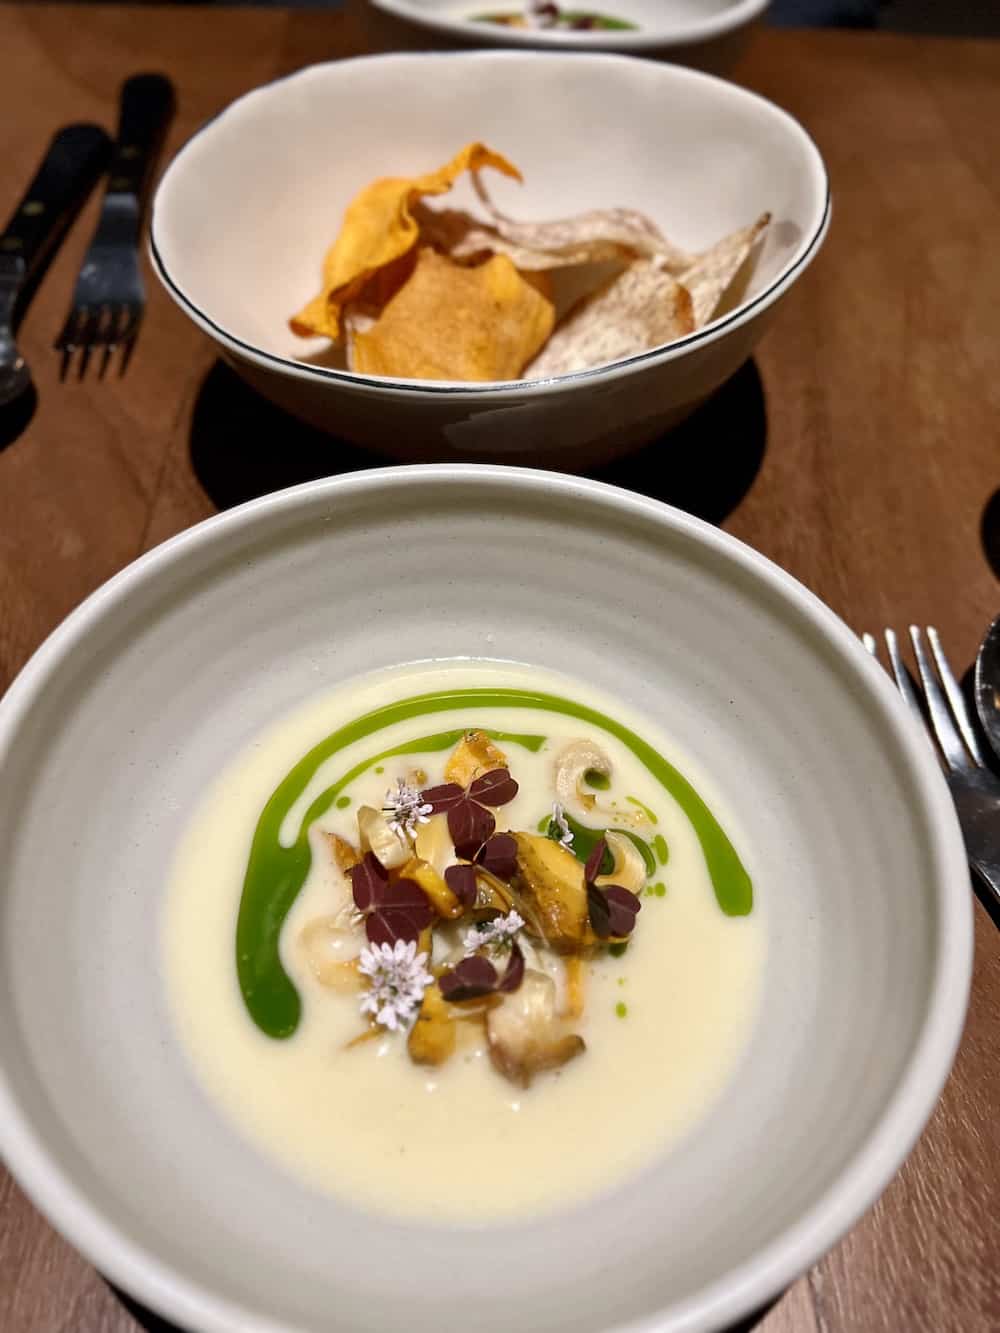 Pujol Mexico City: Ultimate Restaurant Review